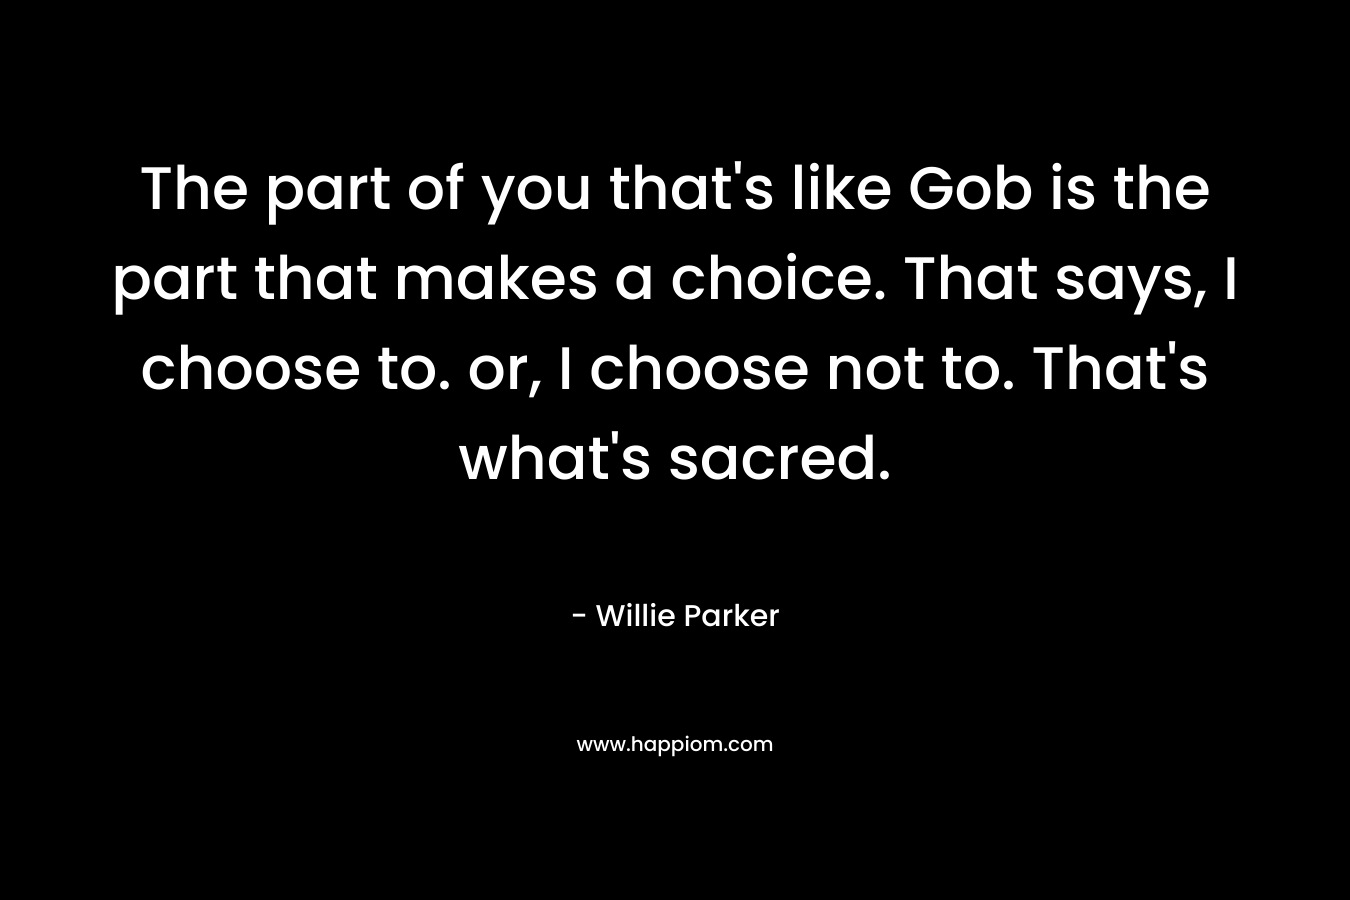 The part of you that’s like Gob is the part that makes a choice. That says, I choose to. or, I choose not to. That’s what’s sacred. – Willie Parker